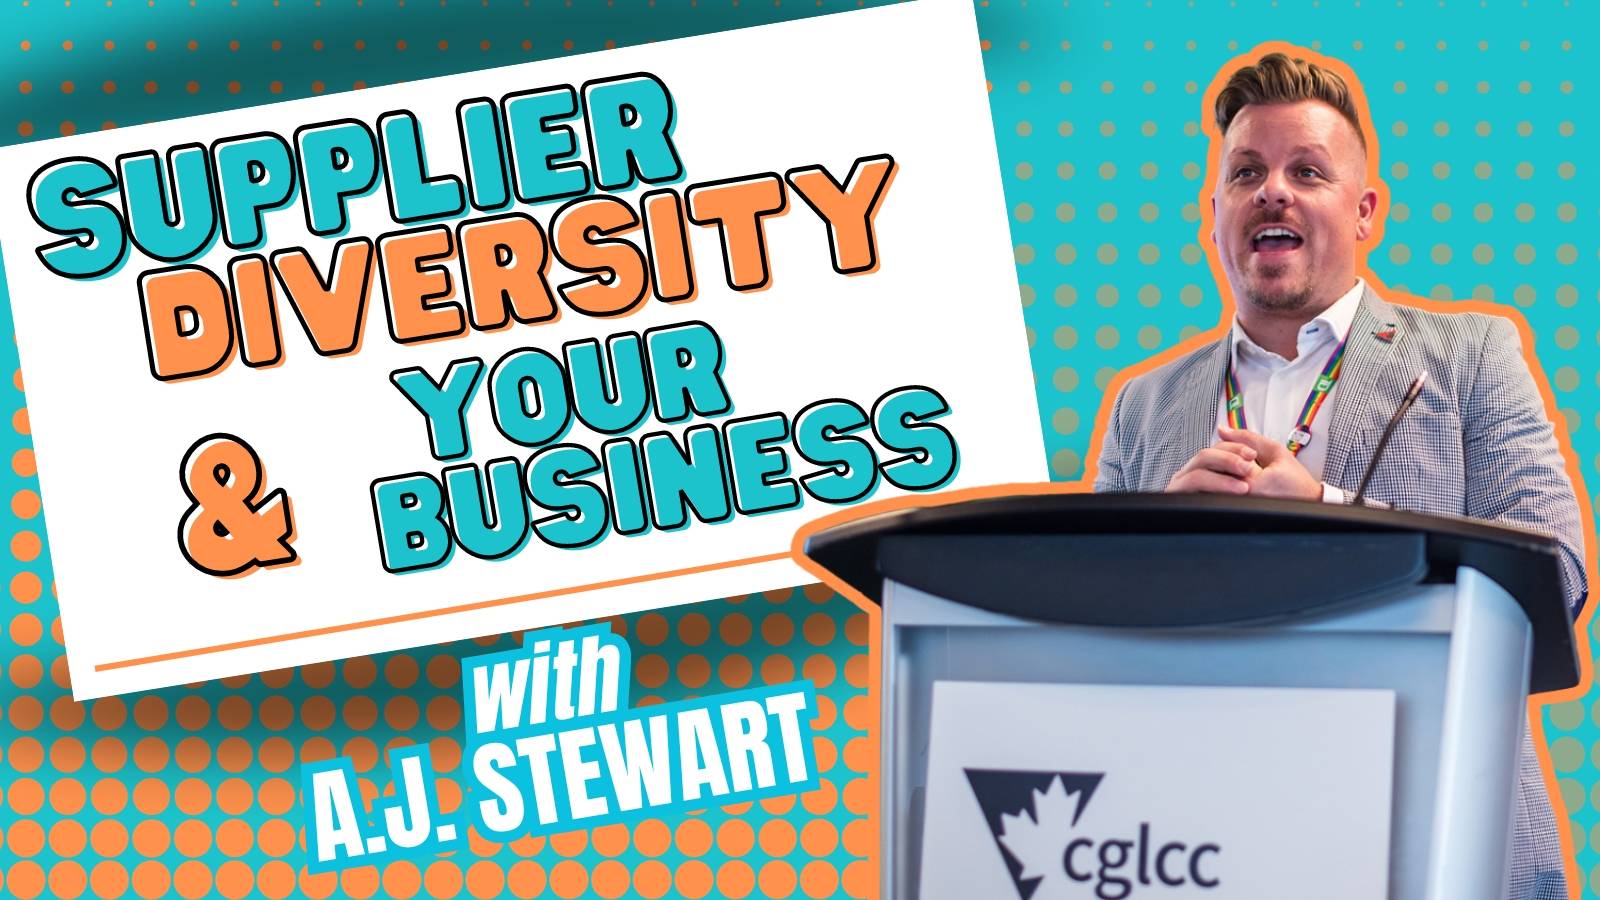 Supplier Diversity & Your Business with A.J. Stewart from the CGLCC